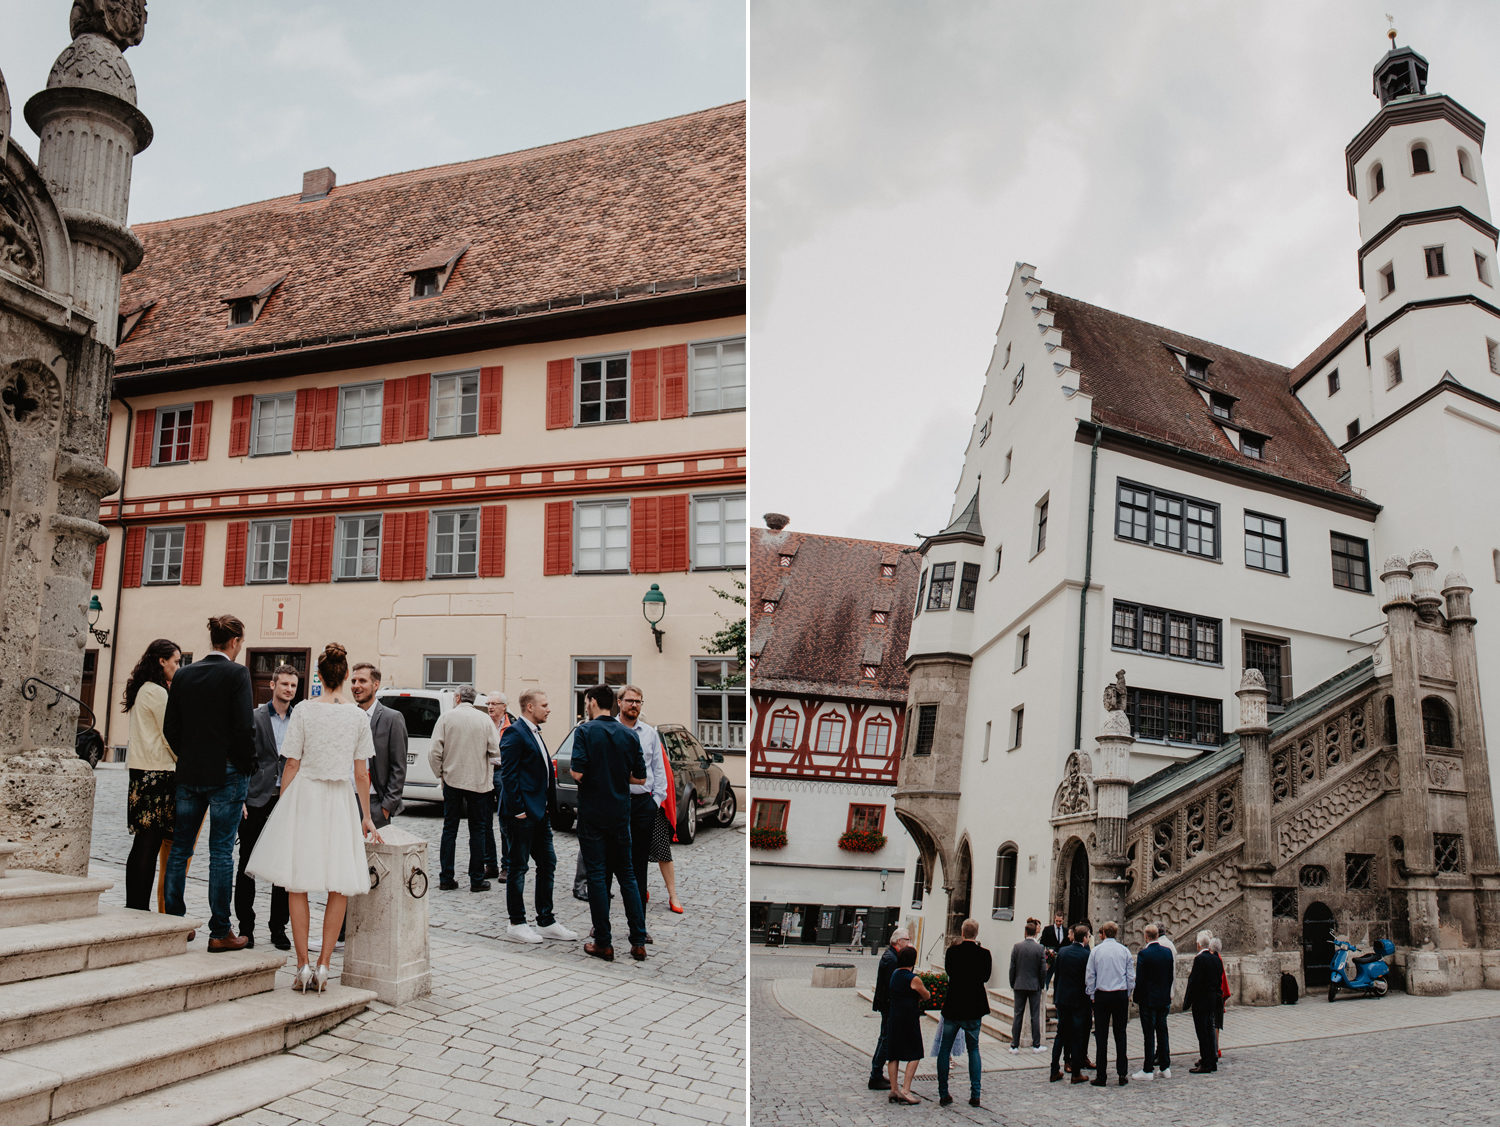 wedding guests waiting in the town square in front of medieval town hall in noerdlingen germany